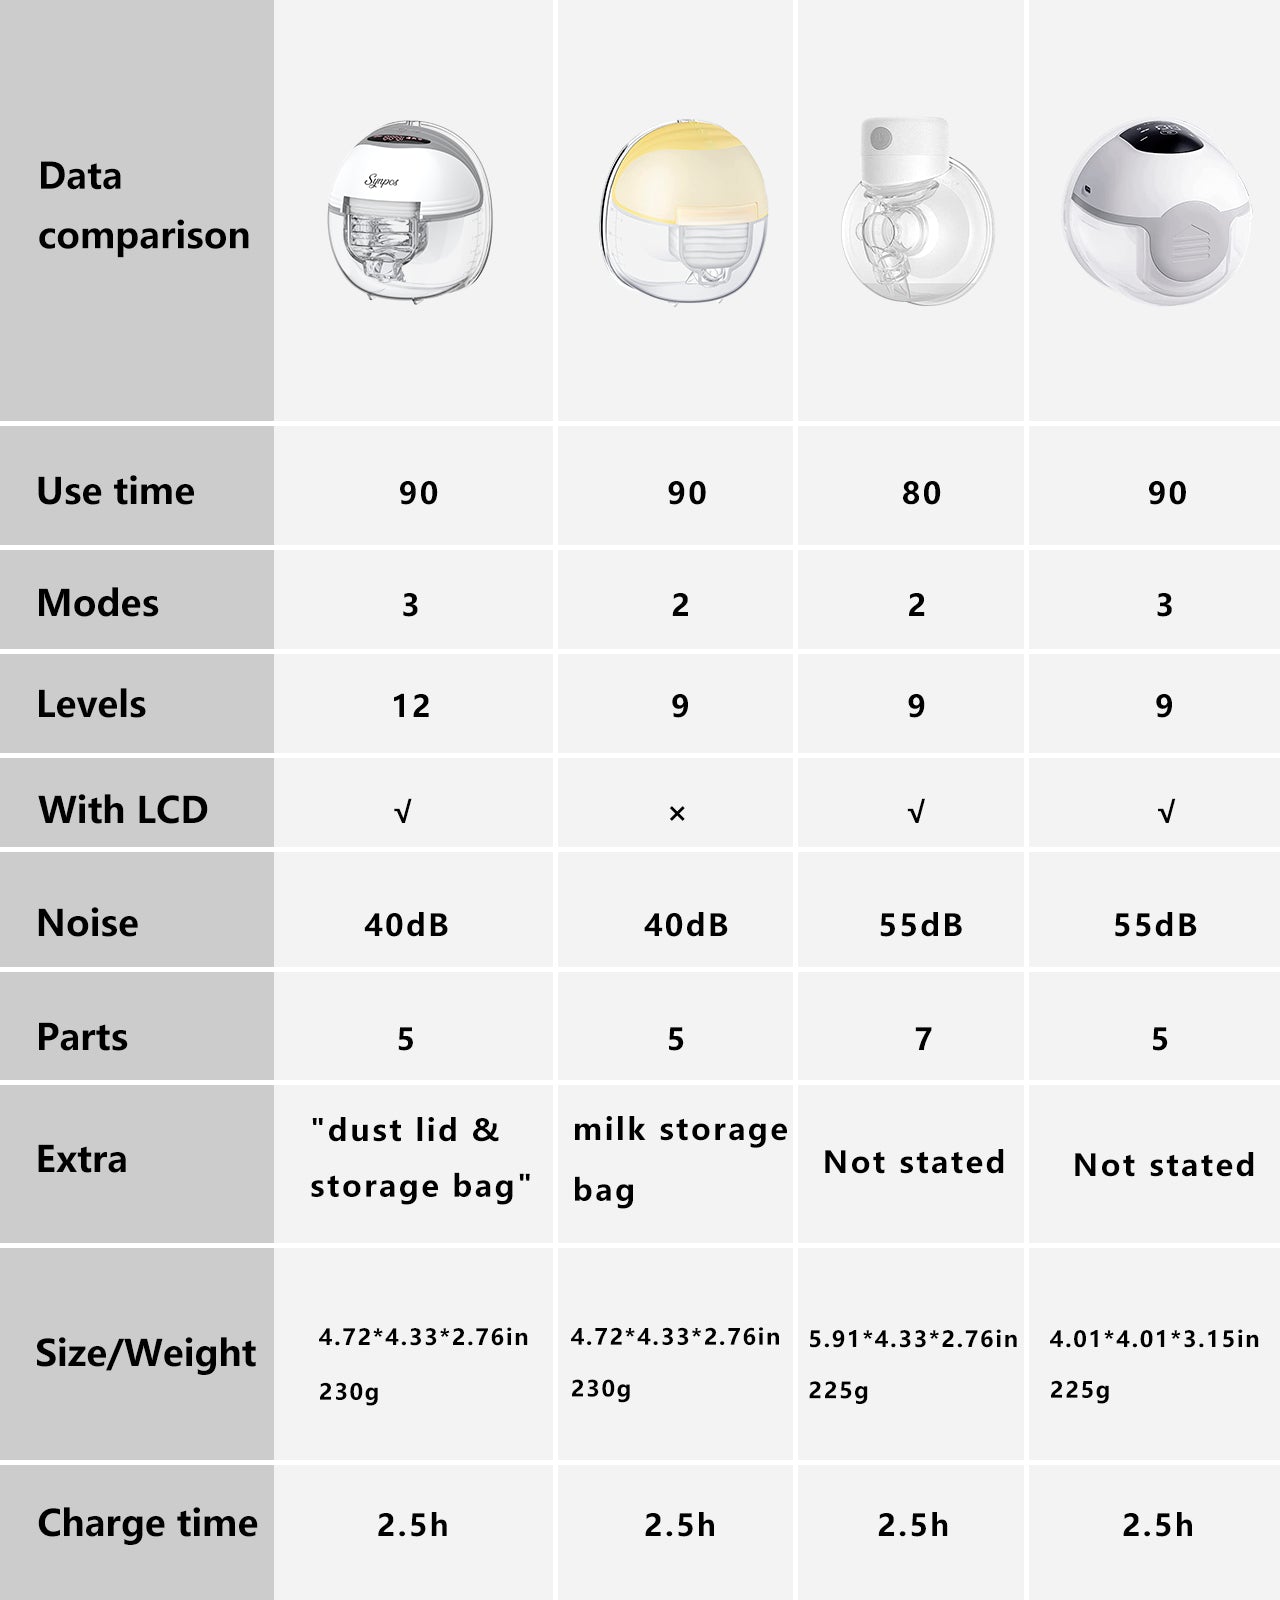 3 Mode 12 Level Double Electric Wearable Breast Pump Handless w